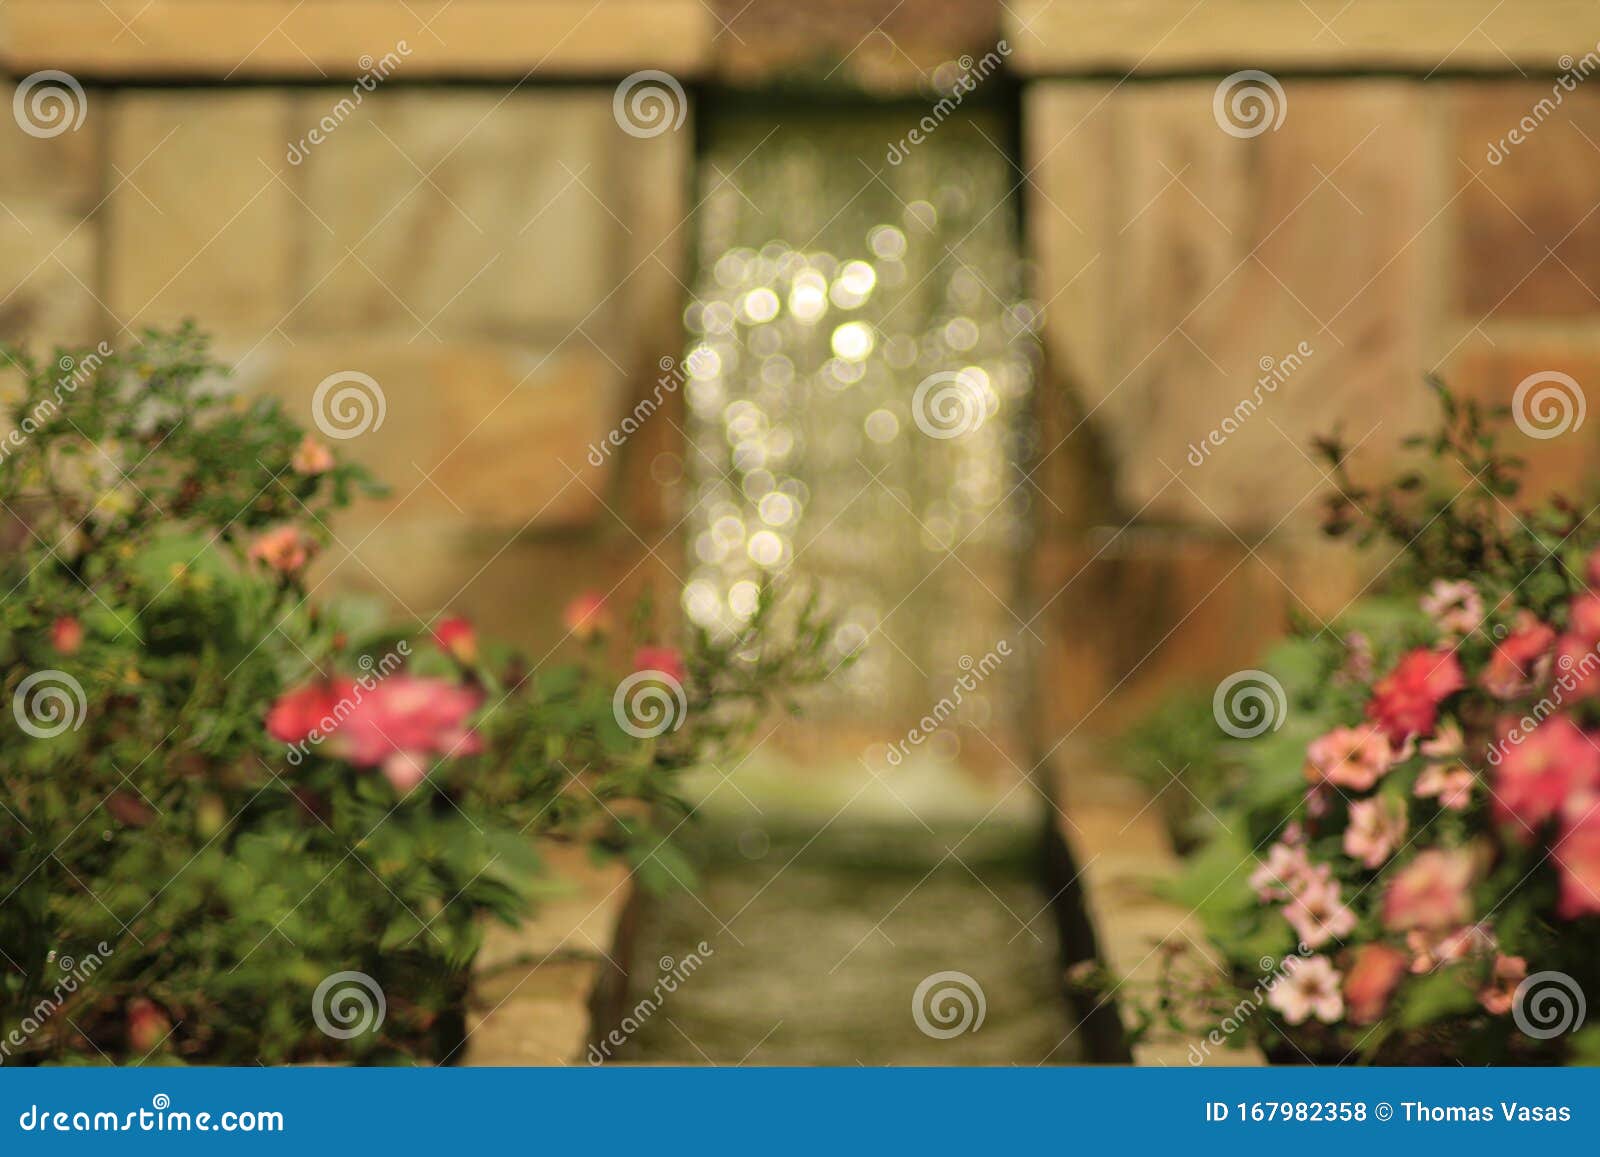 The Little Waterfall In The Flower Gardens Stock Photo Image Of